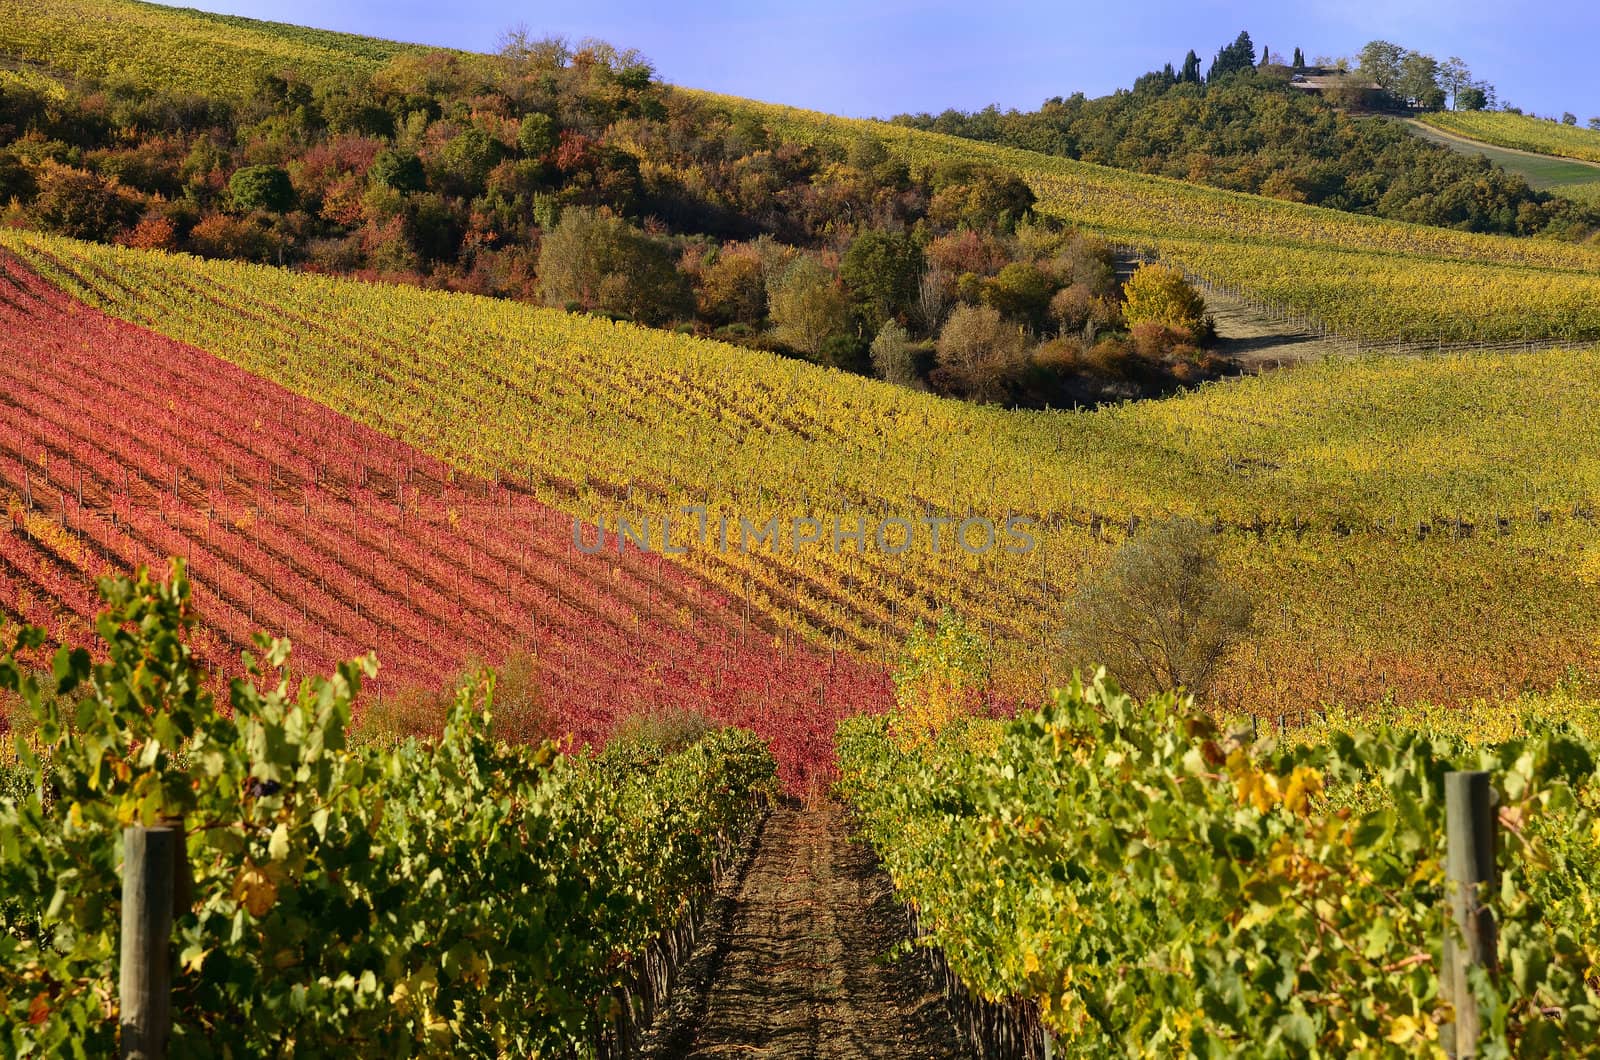 The autumn in the chianti area, in tuscany